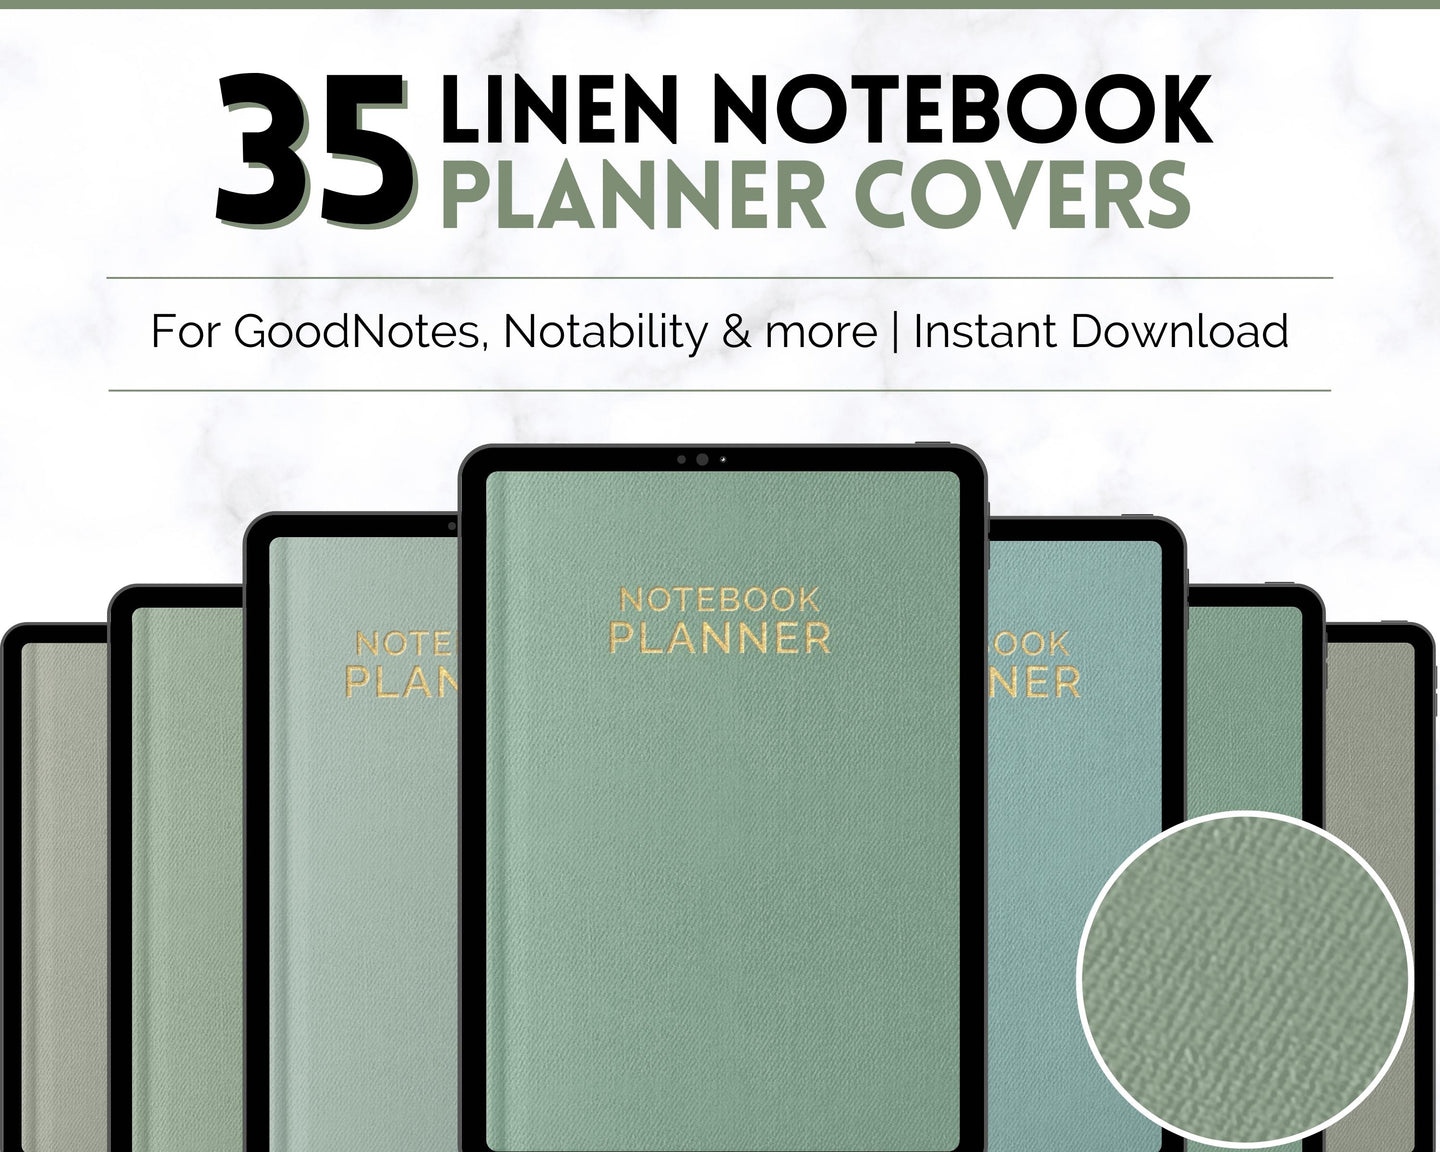 35 Digital Planner Notebook Covers | Digital Journal Covers for GoodNotes & iPad | Linen Texture Green